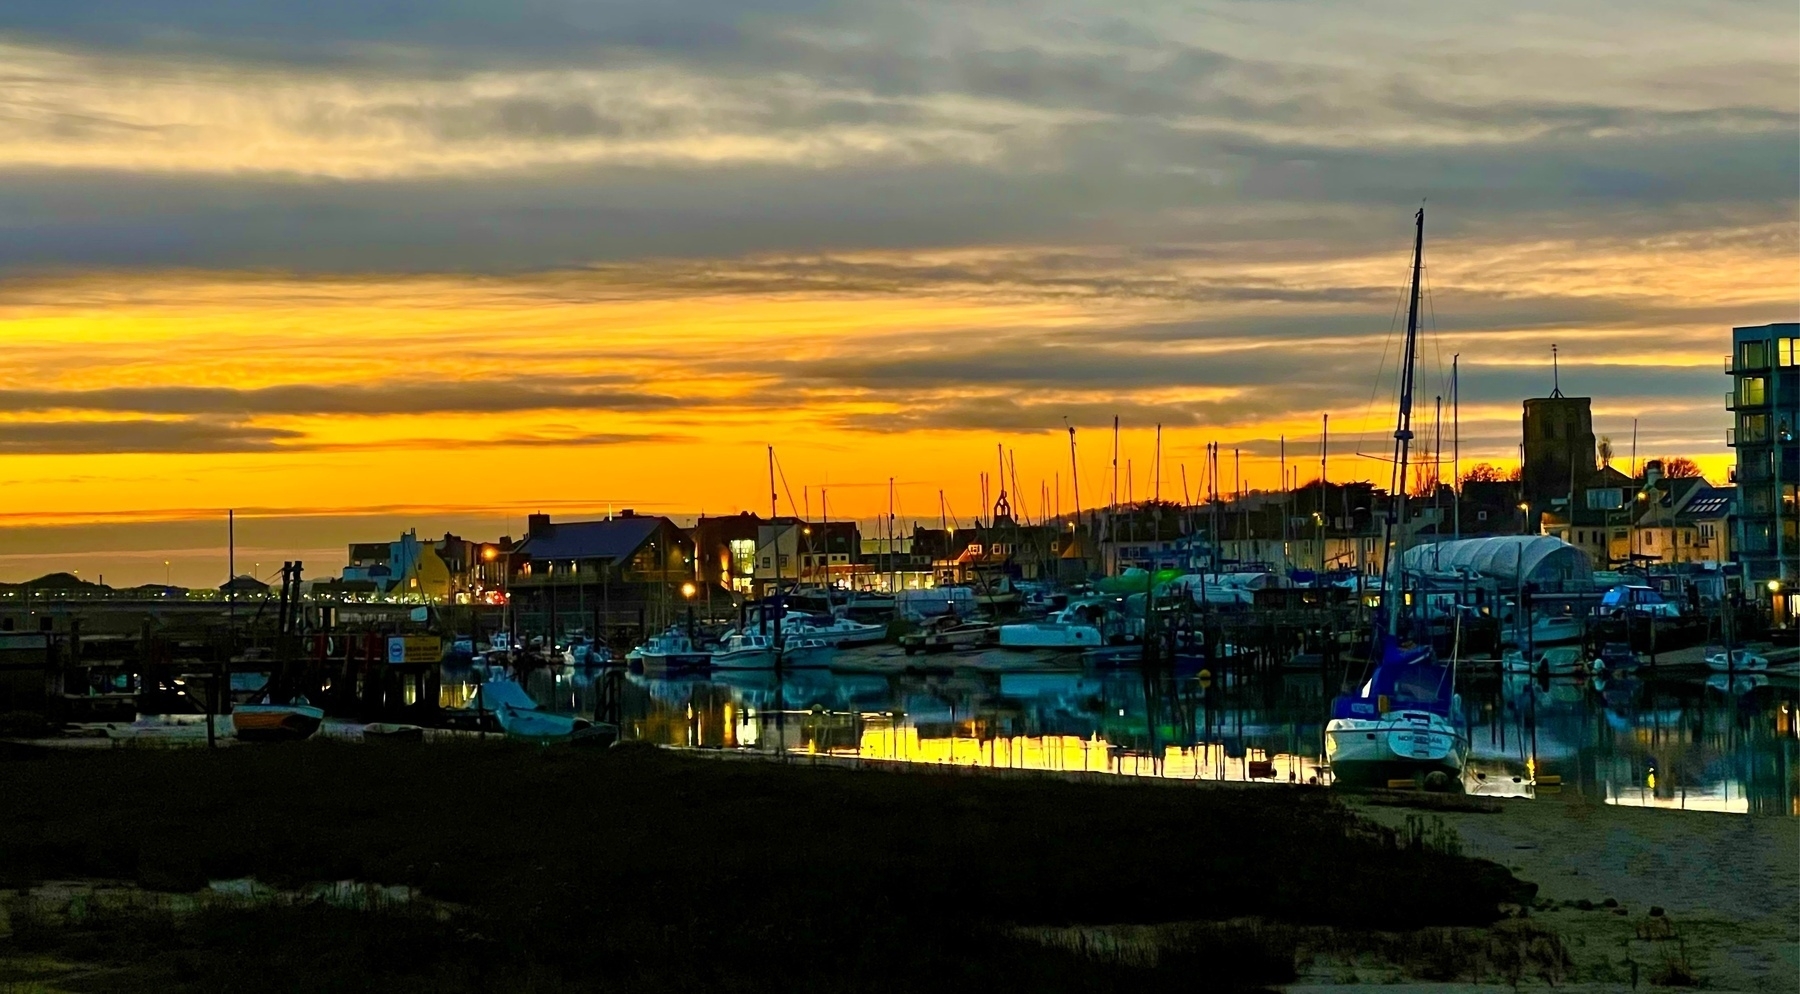 Sunset over Shoreham-by-Sea from the Emerald Quay slipway.